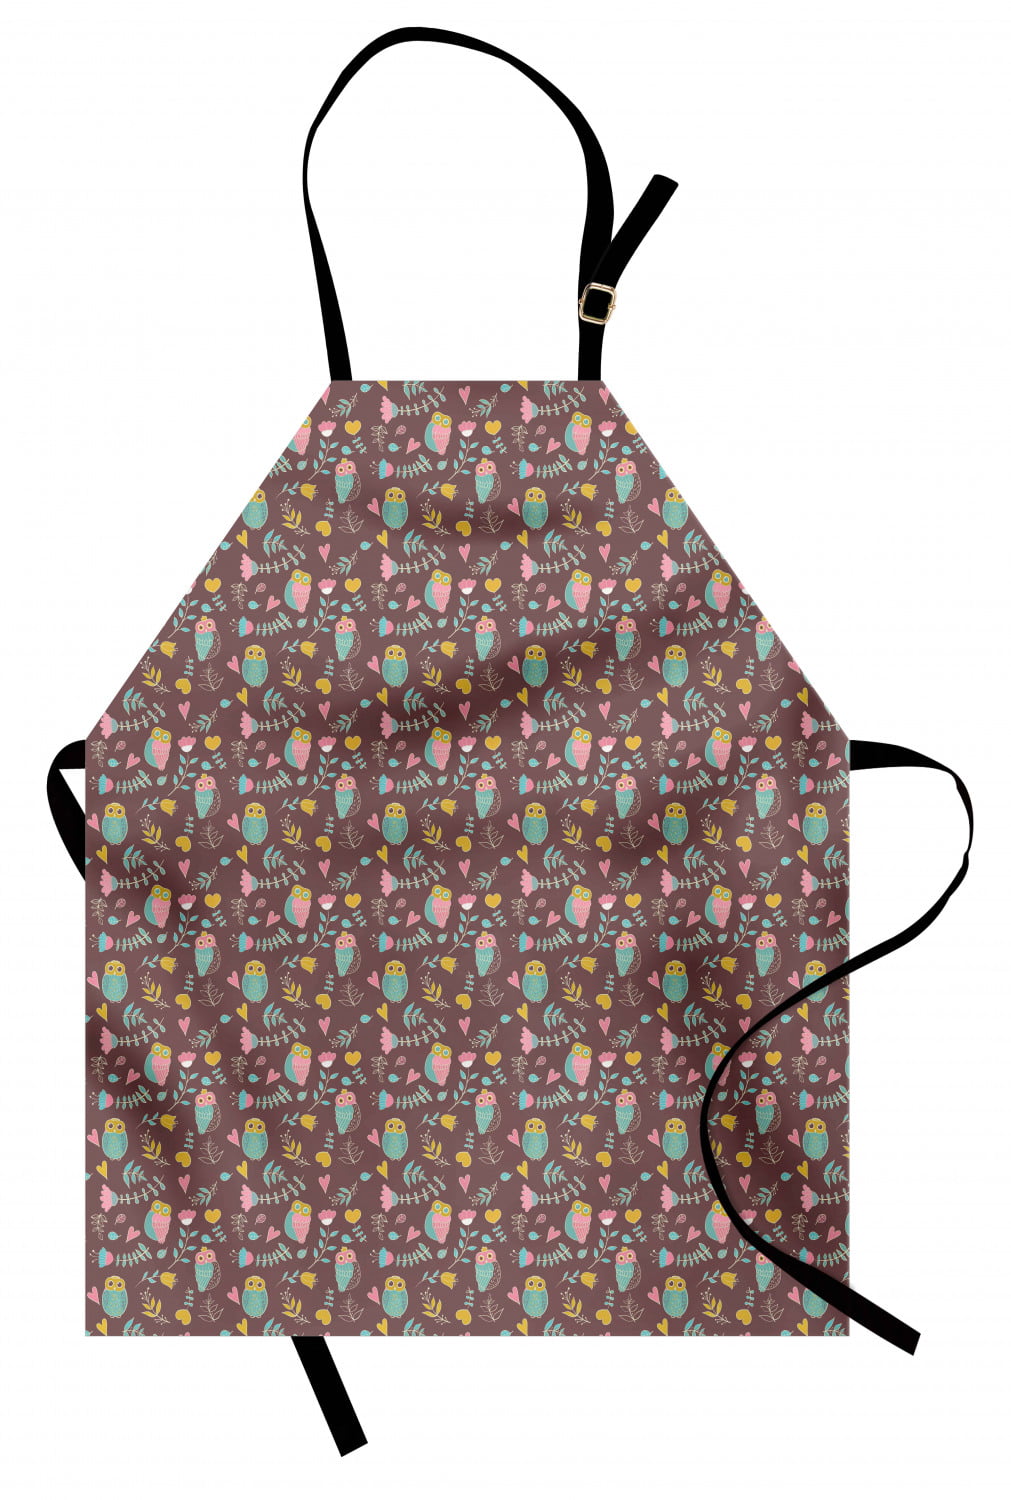 Details about   Apron with Adjustable Strap for Garden Cooking Unisex Standard Size Ambesonne 